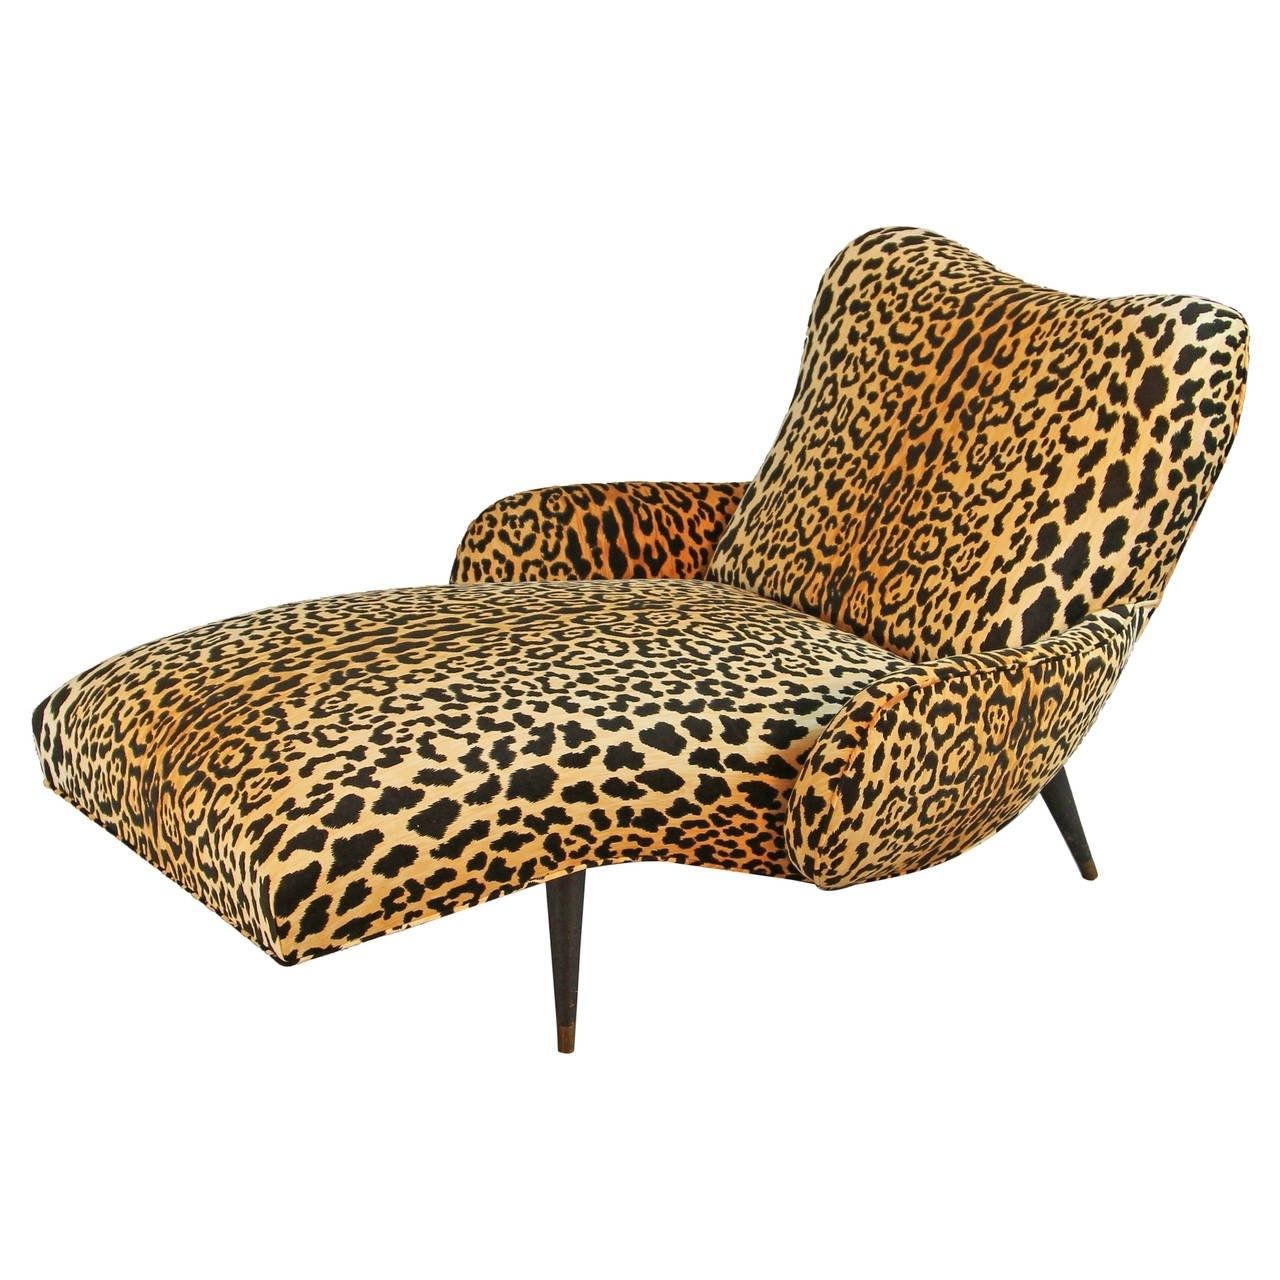 Featured Photo of  Best 15+ of Leopard Chaise Lounges